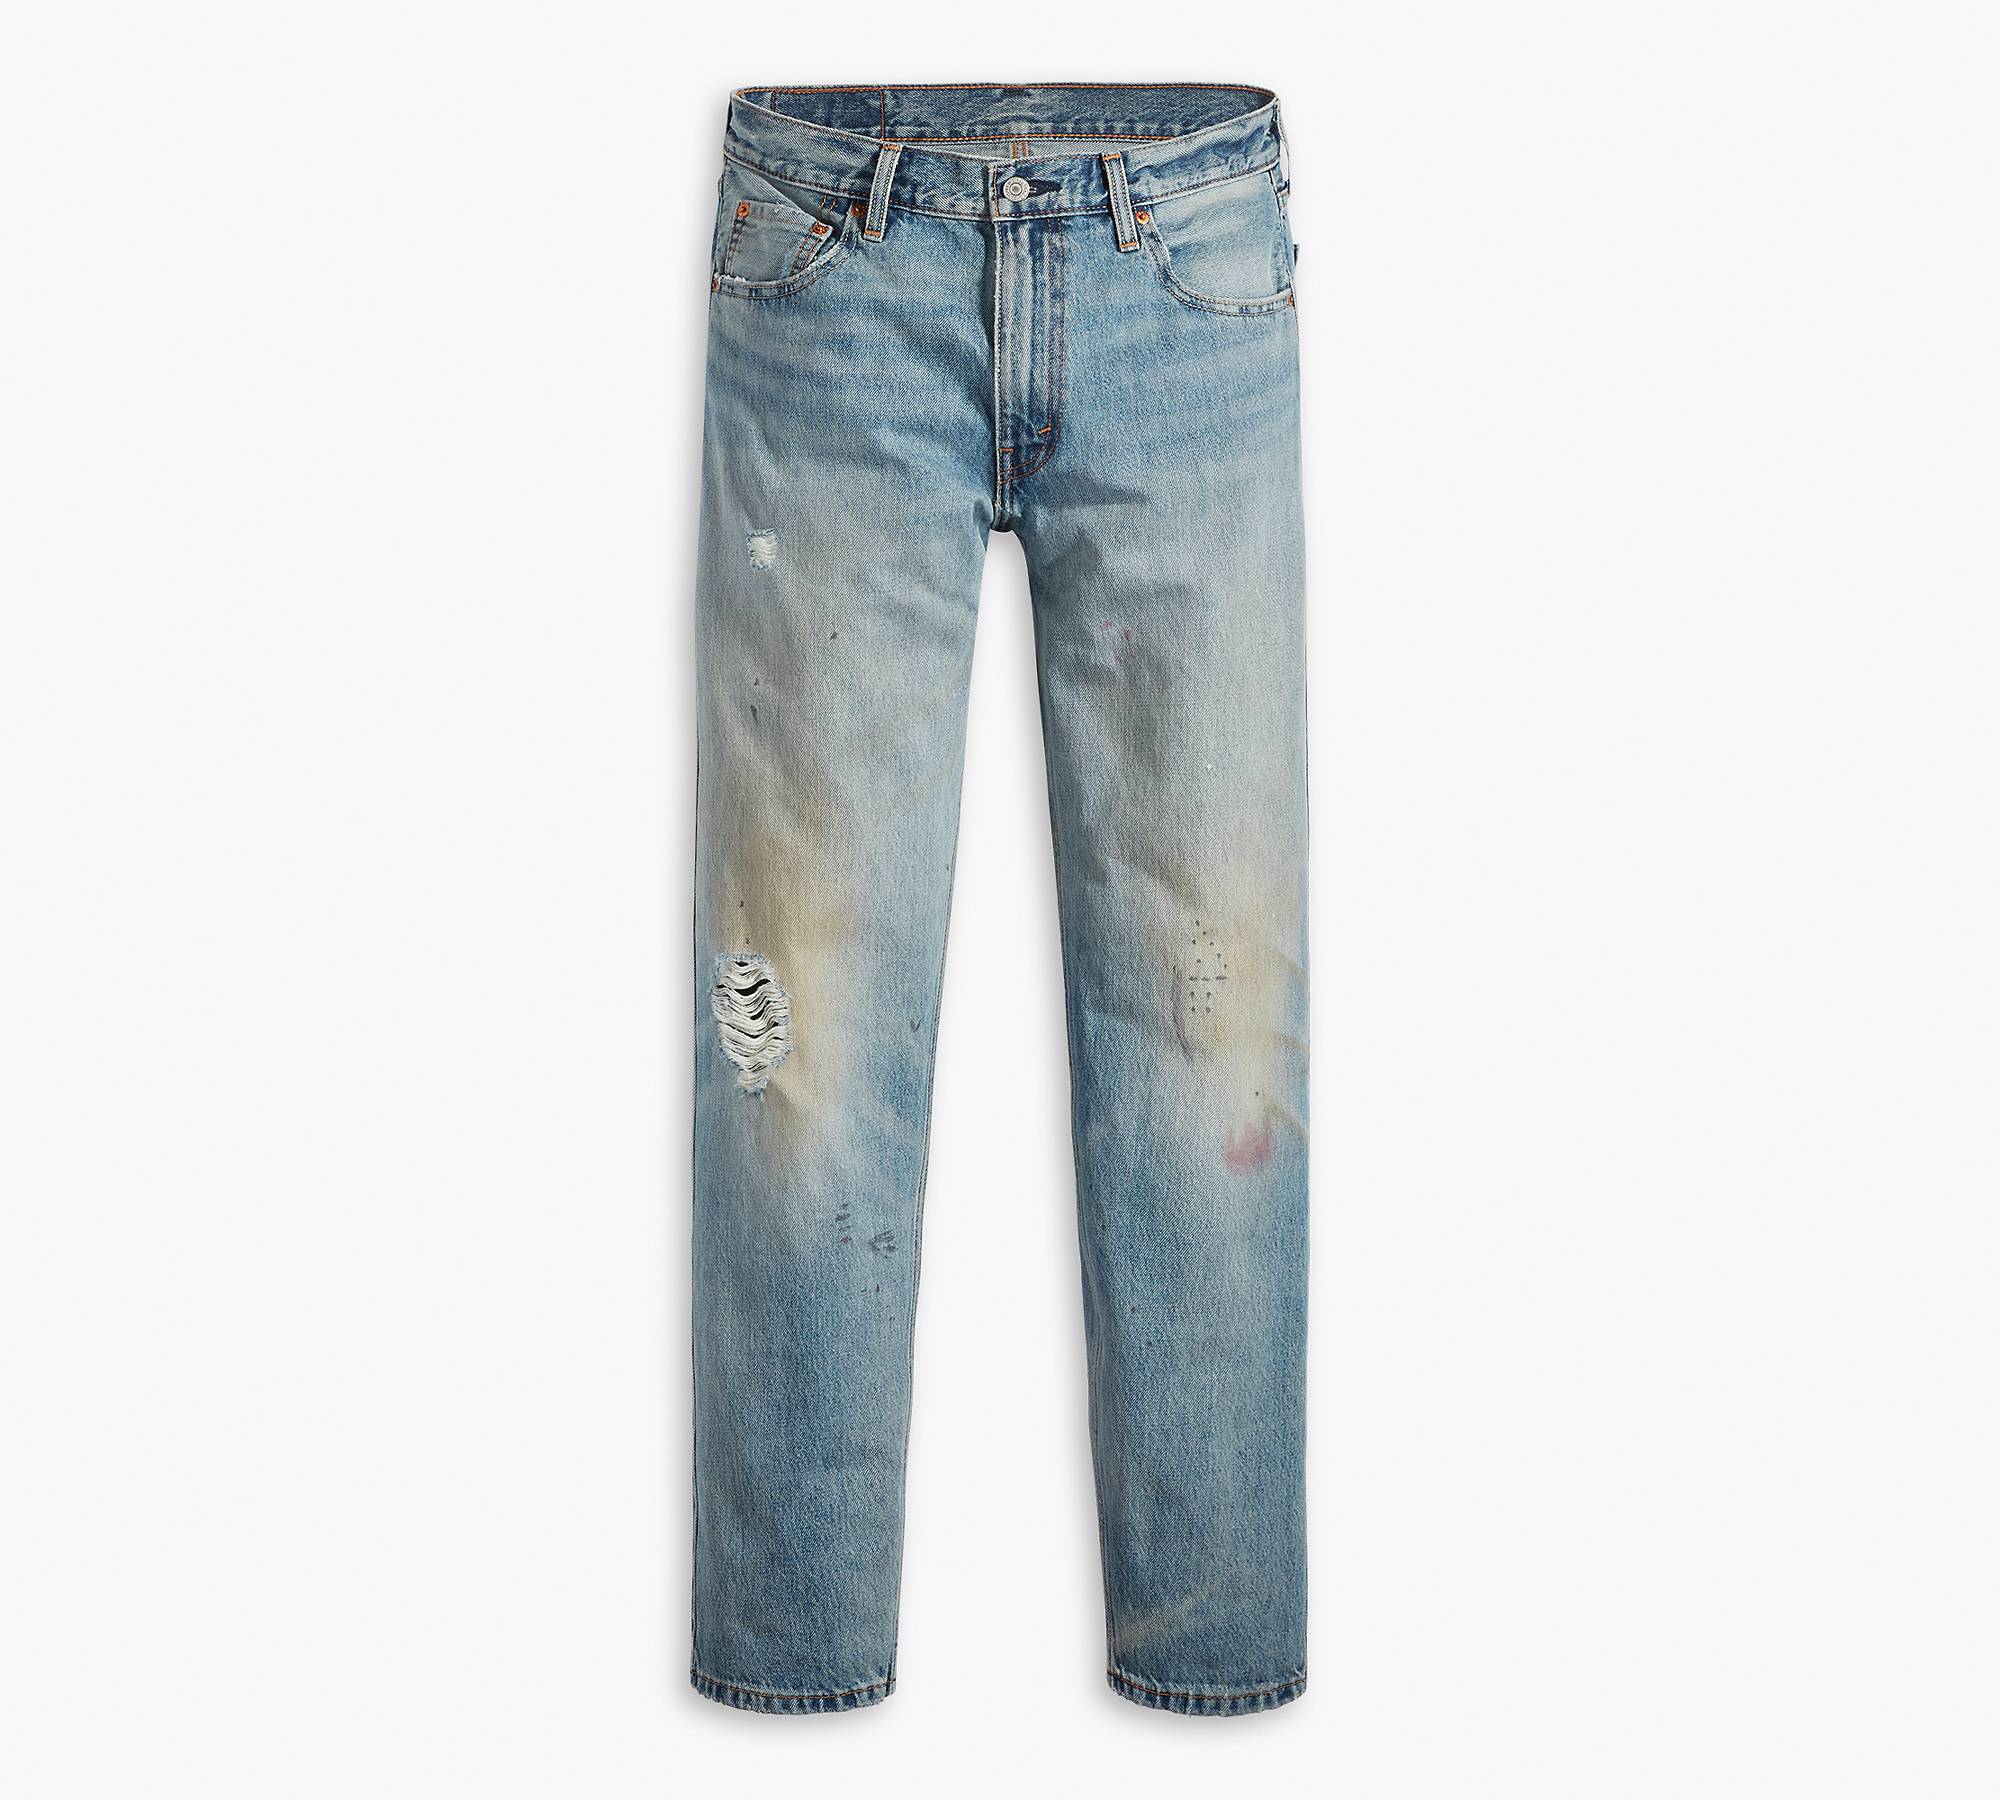 550™ '92 Relaxed Taper Fit Men's Jeans - Medium Wash | Levi's® US